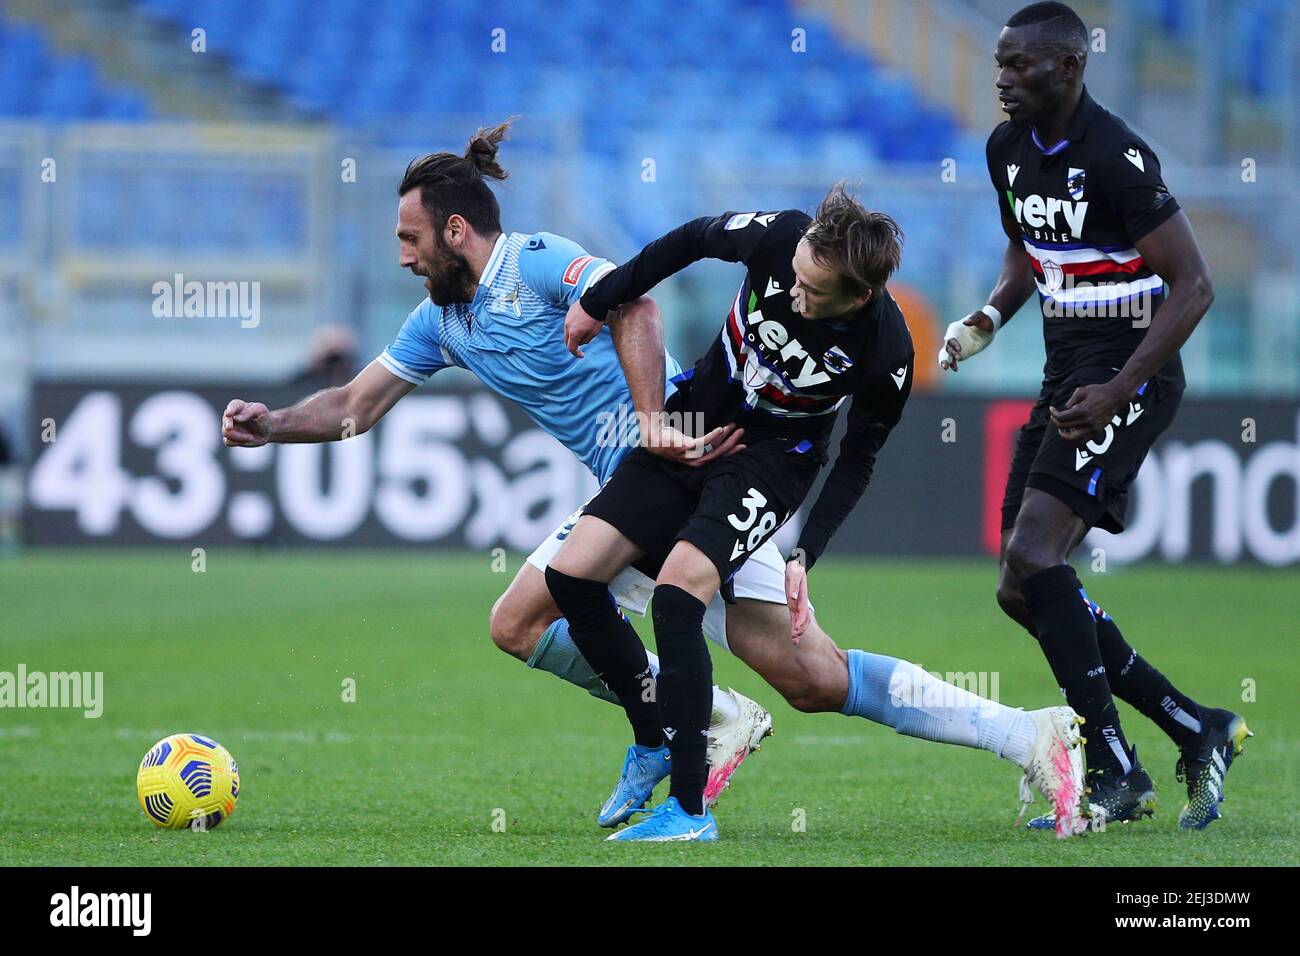 Vedat Muriqi of Lazio (L) vies for the ball with Mikkel Damsgaard of Sampdoria during the Italian championship Serie A foot / LM Stock Photo